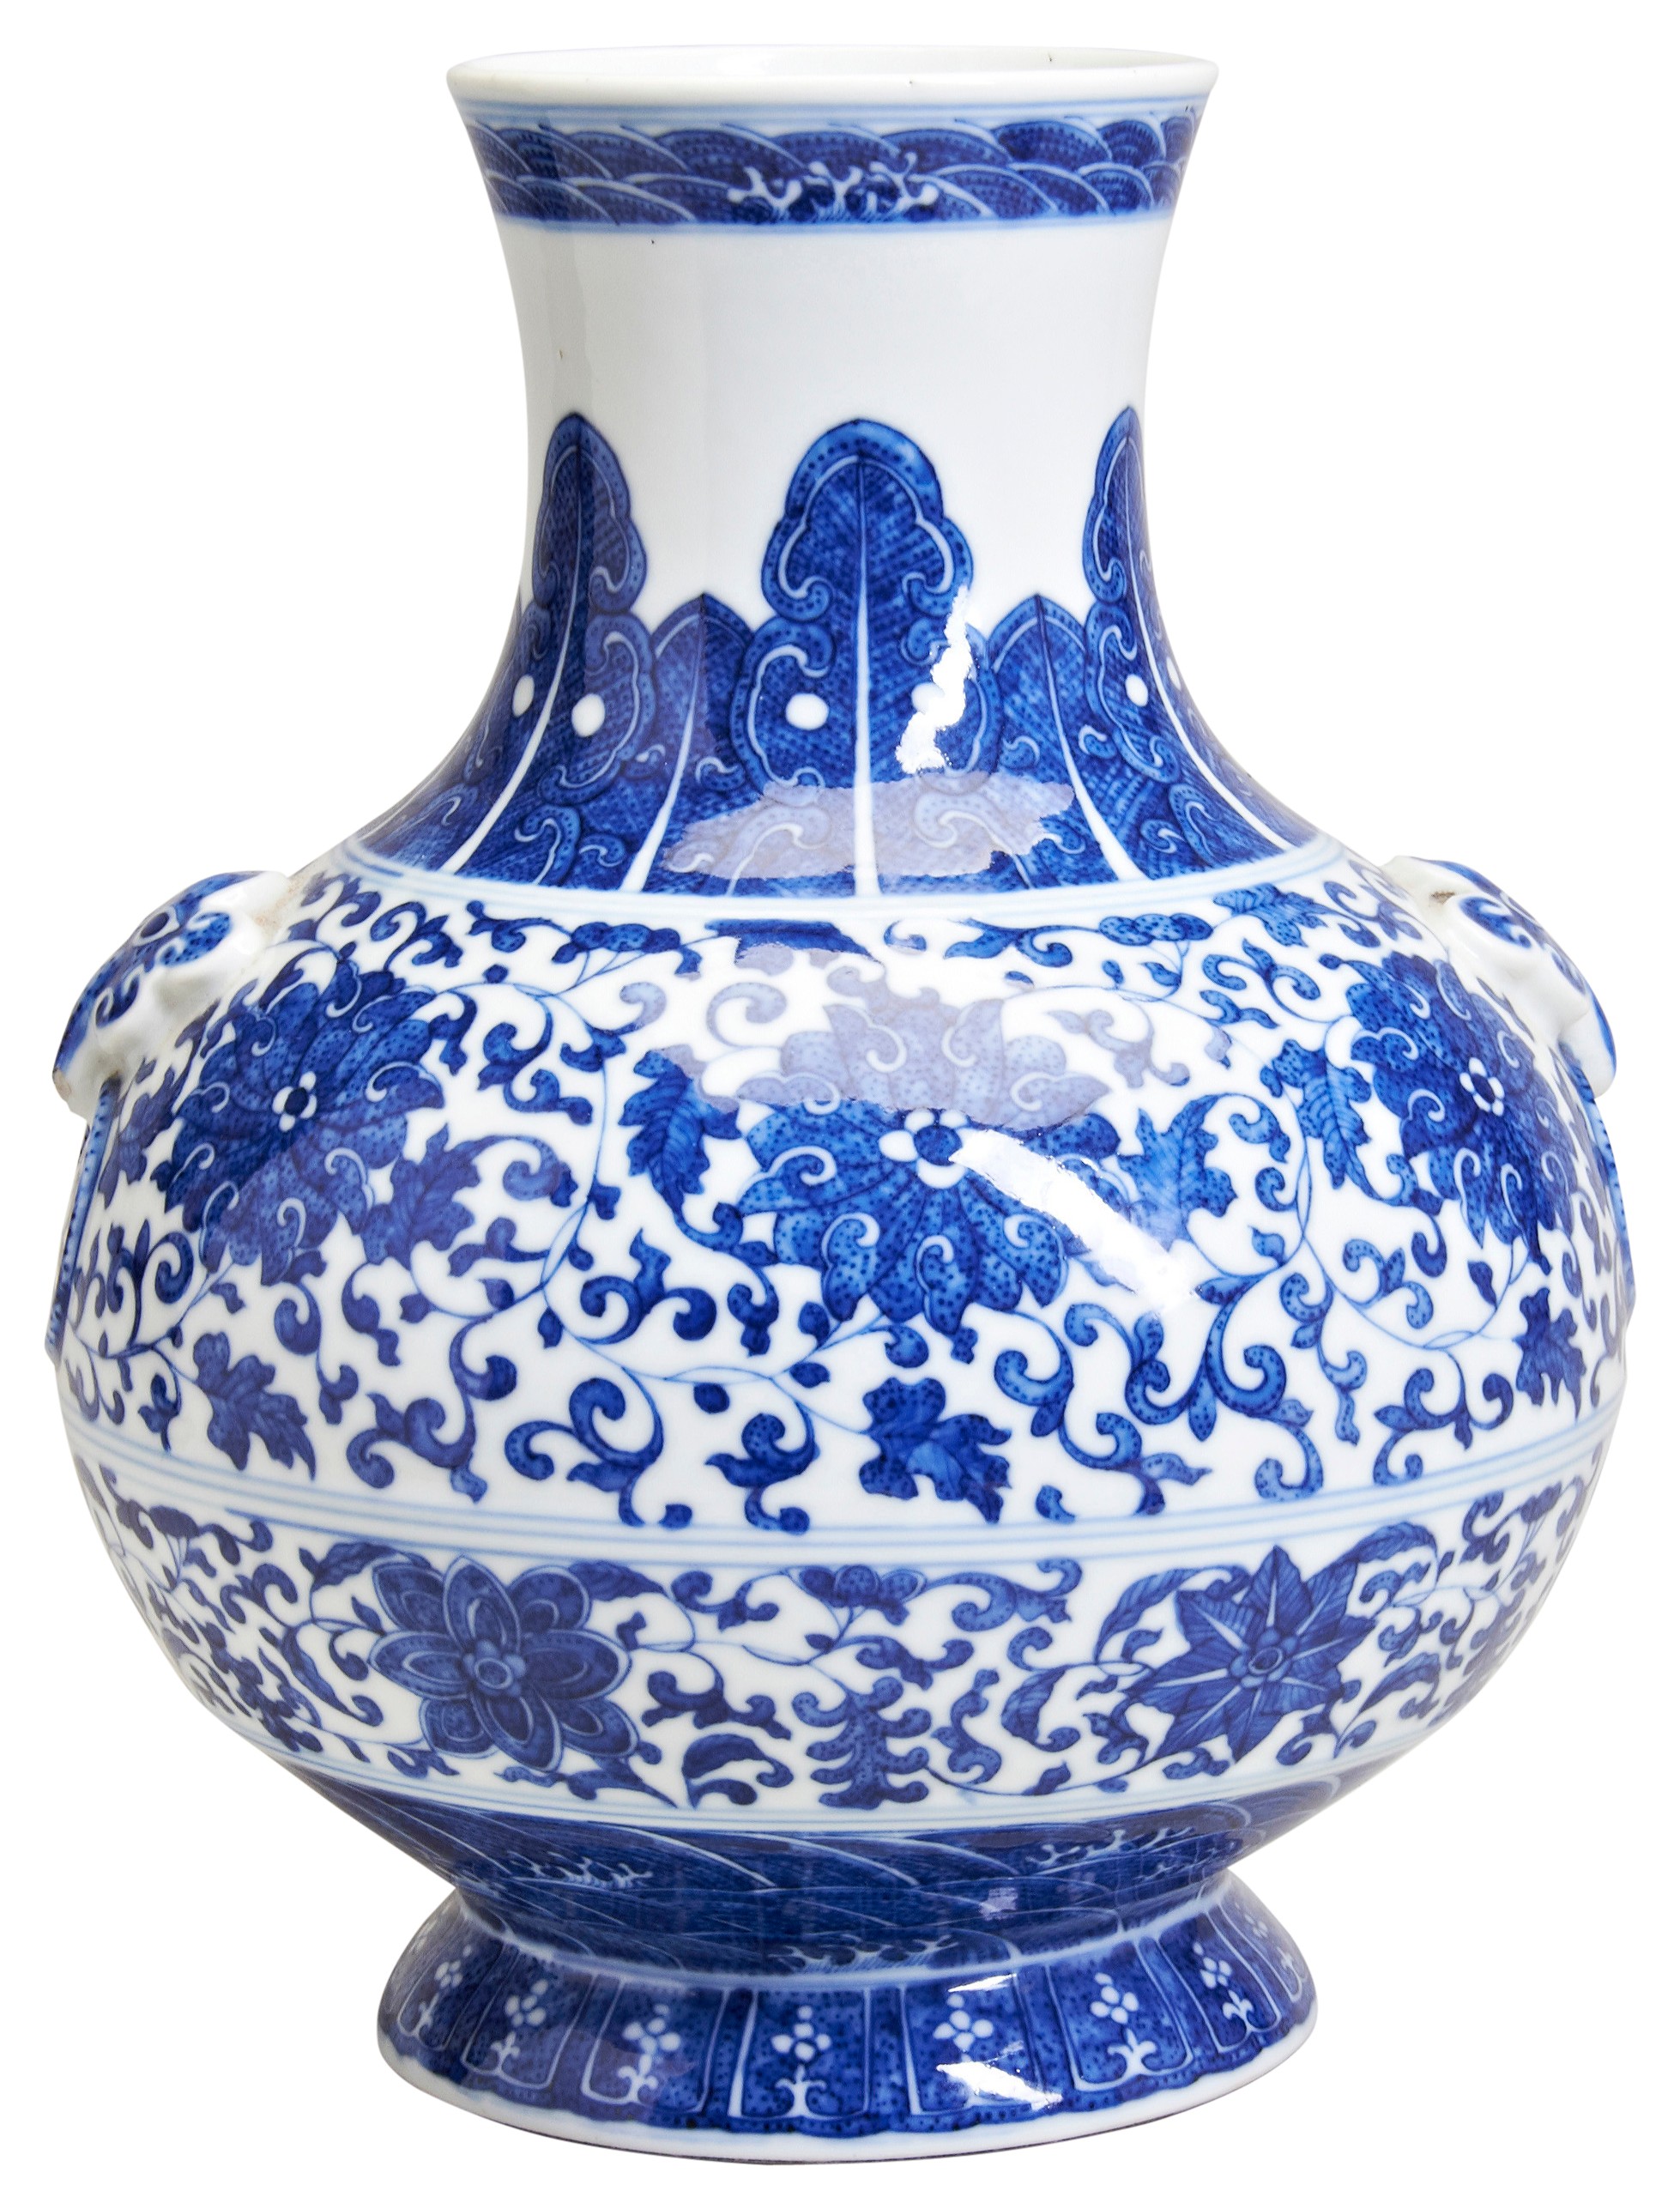 A MING-STYLE BLUE & WHITE 'LOTUS' VASE QING DYNASTY, 19TH CENTURY of compressed Hu-form, the sides